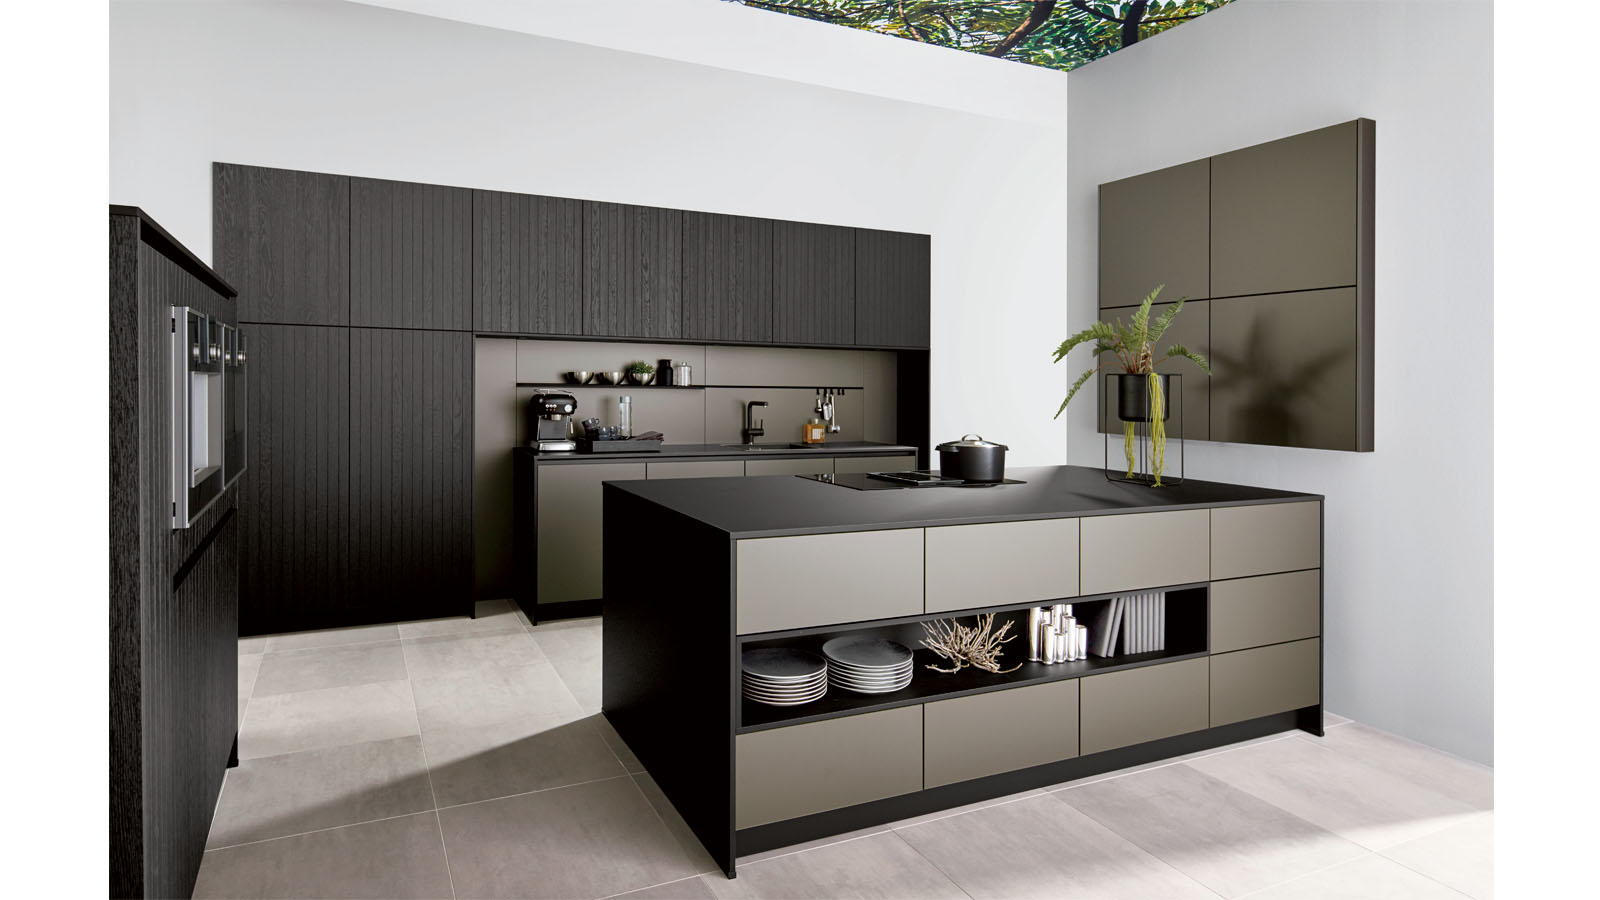 Kitchen trends in 2020 - Kitchens and Bathrooms News